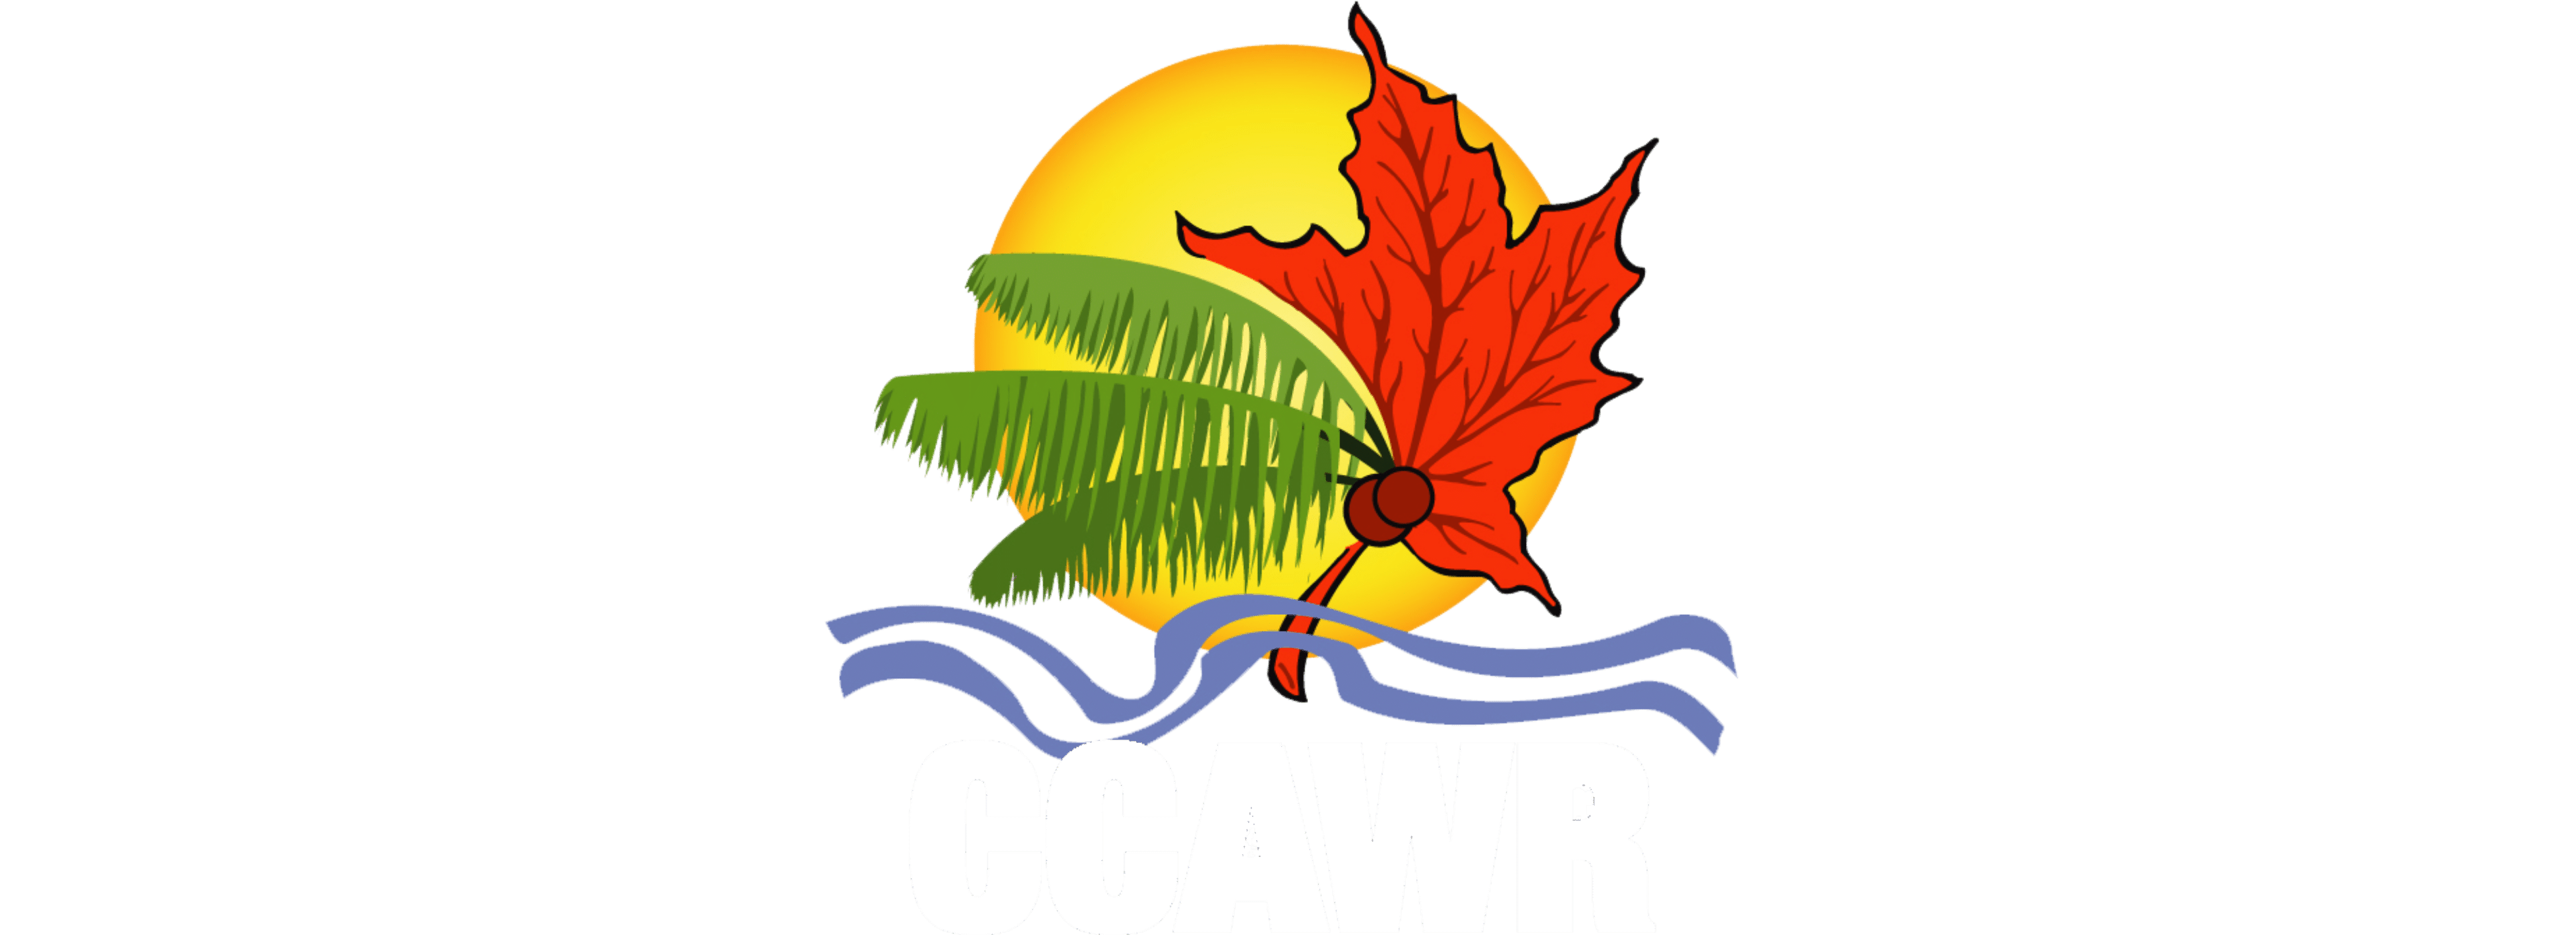 Logo featuring a tropical palm leaf, a maple leaf, and the sun, with the acronym "ccawr" below, symbolizing cultural unity. Toronto Caribana Carnival: Ultimate Guide to Caribana Festival Events